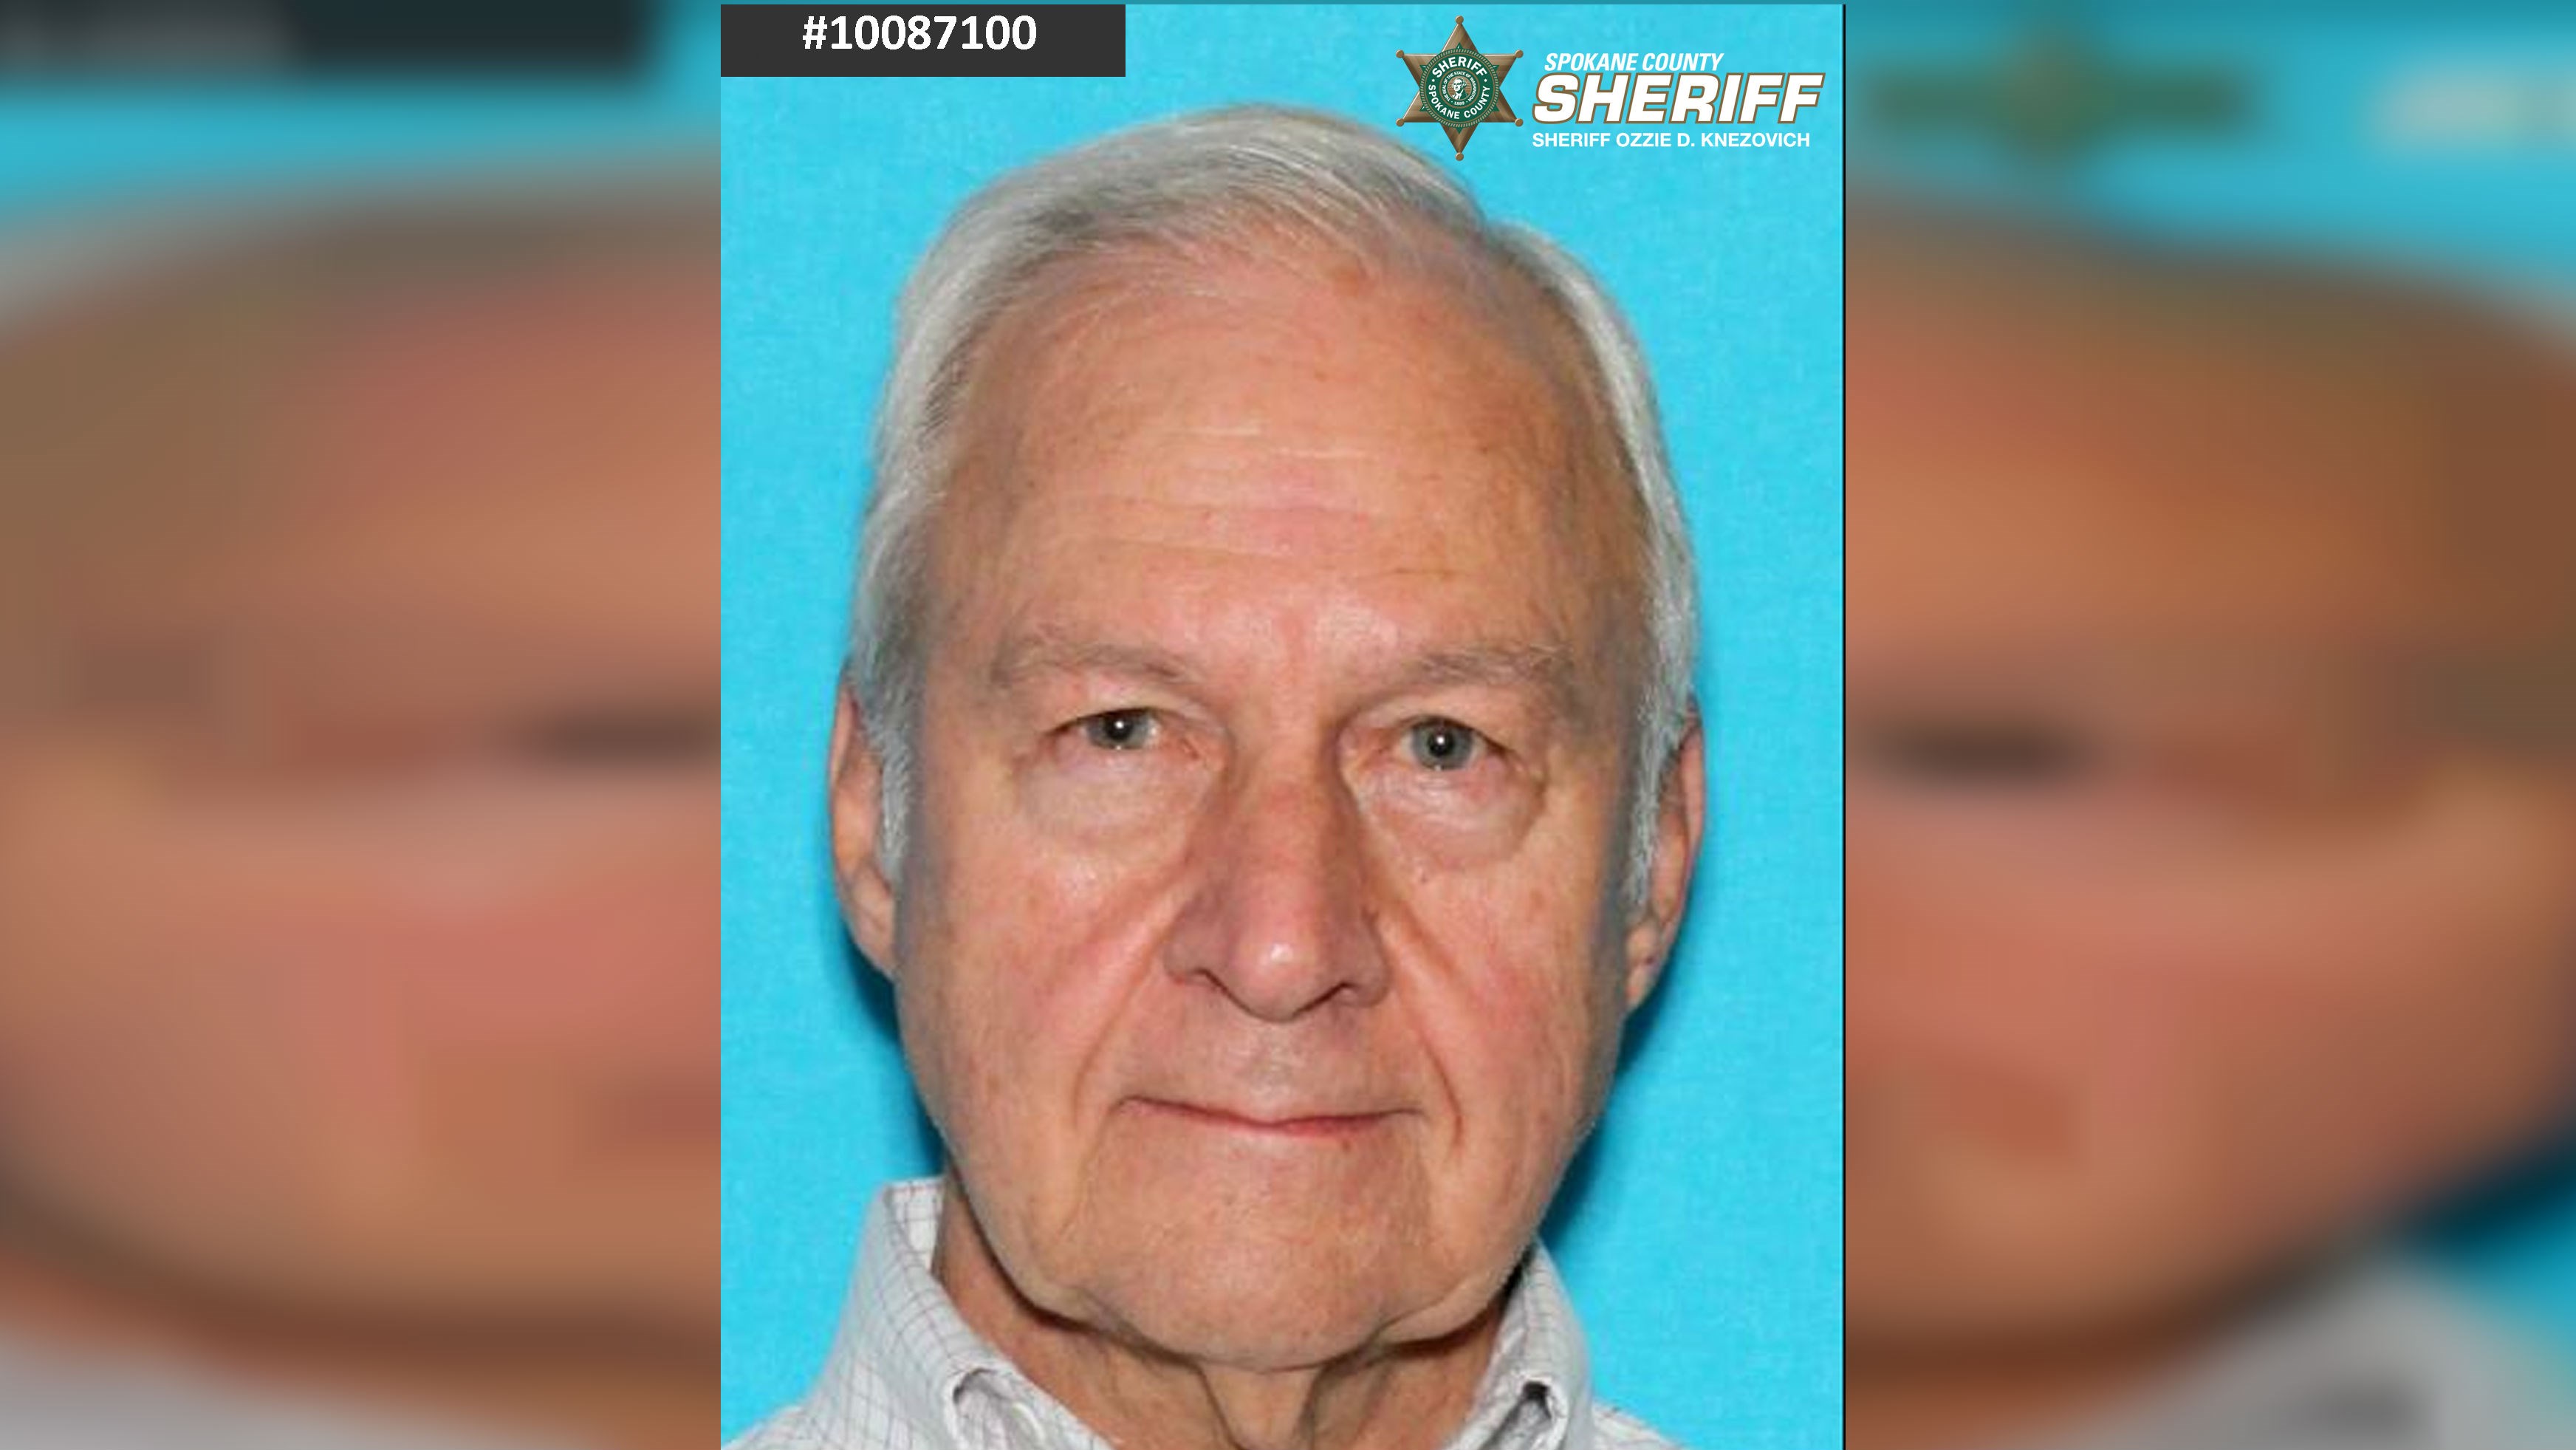 Sheriffs Office Looking For Missing 73 Year Old Man After Wife Spokane North Idaho News 5965